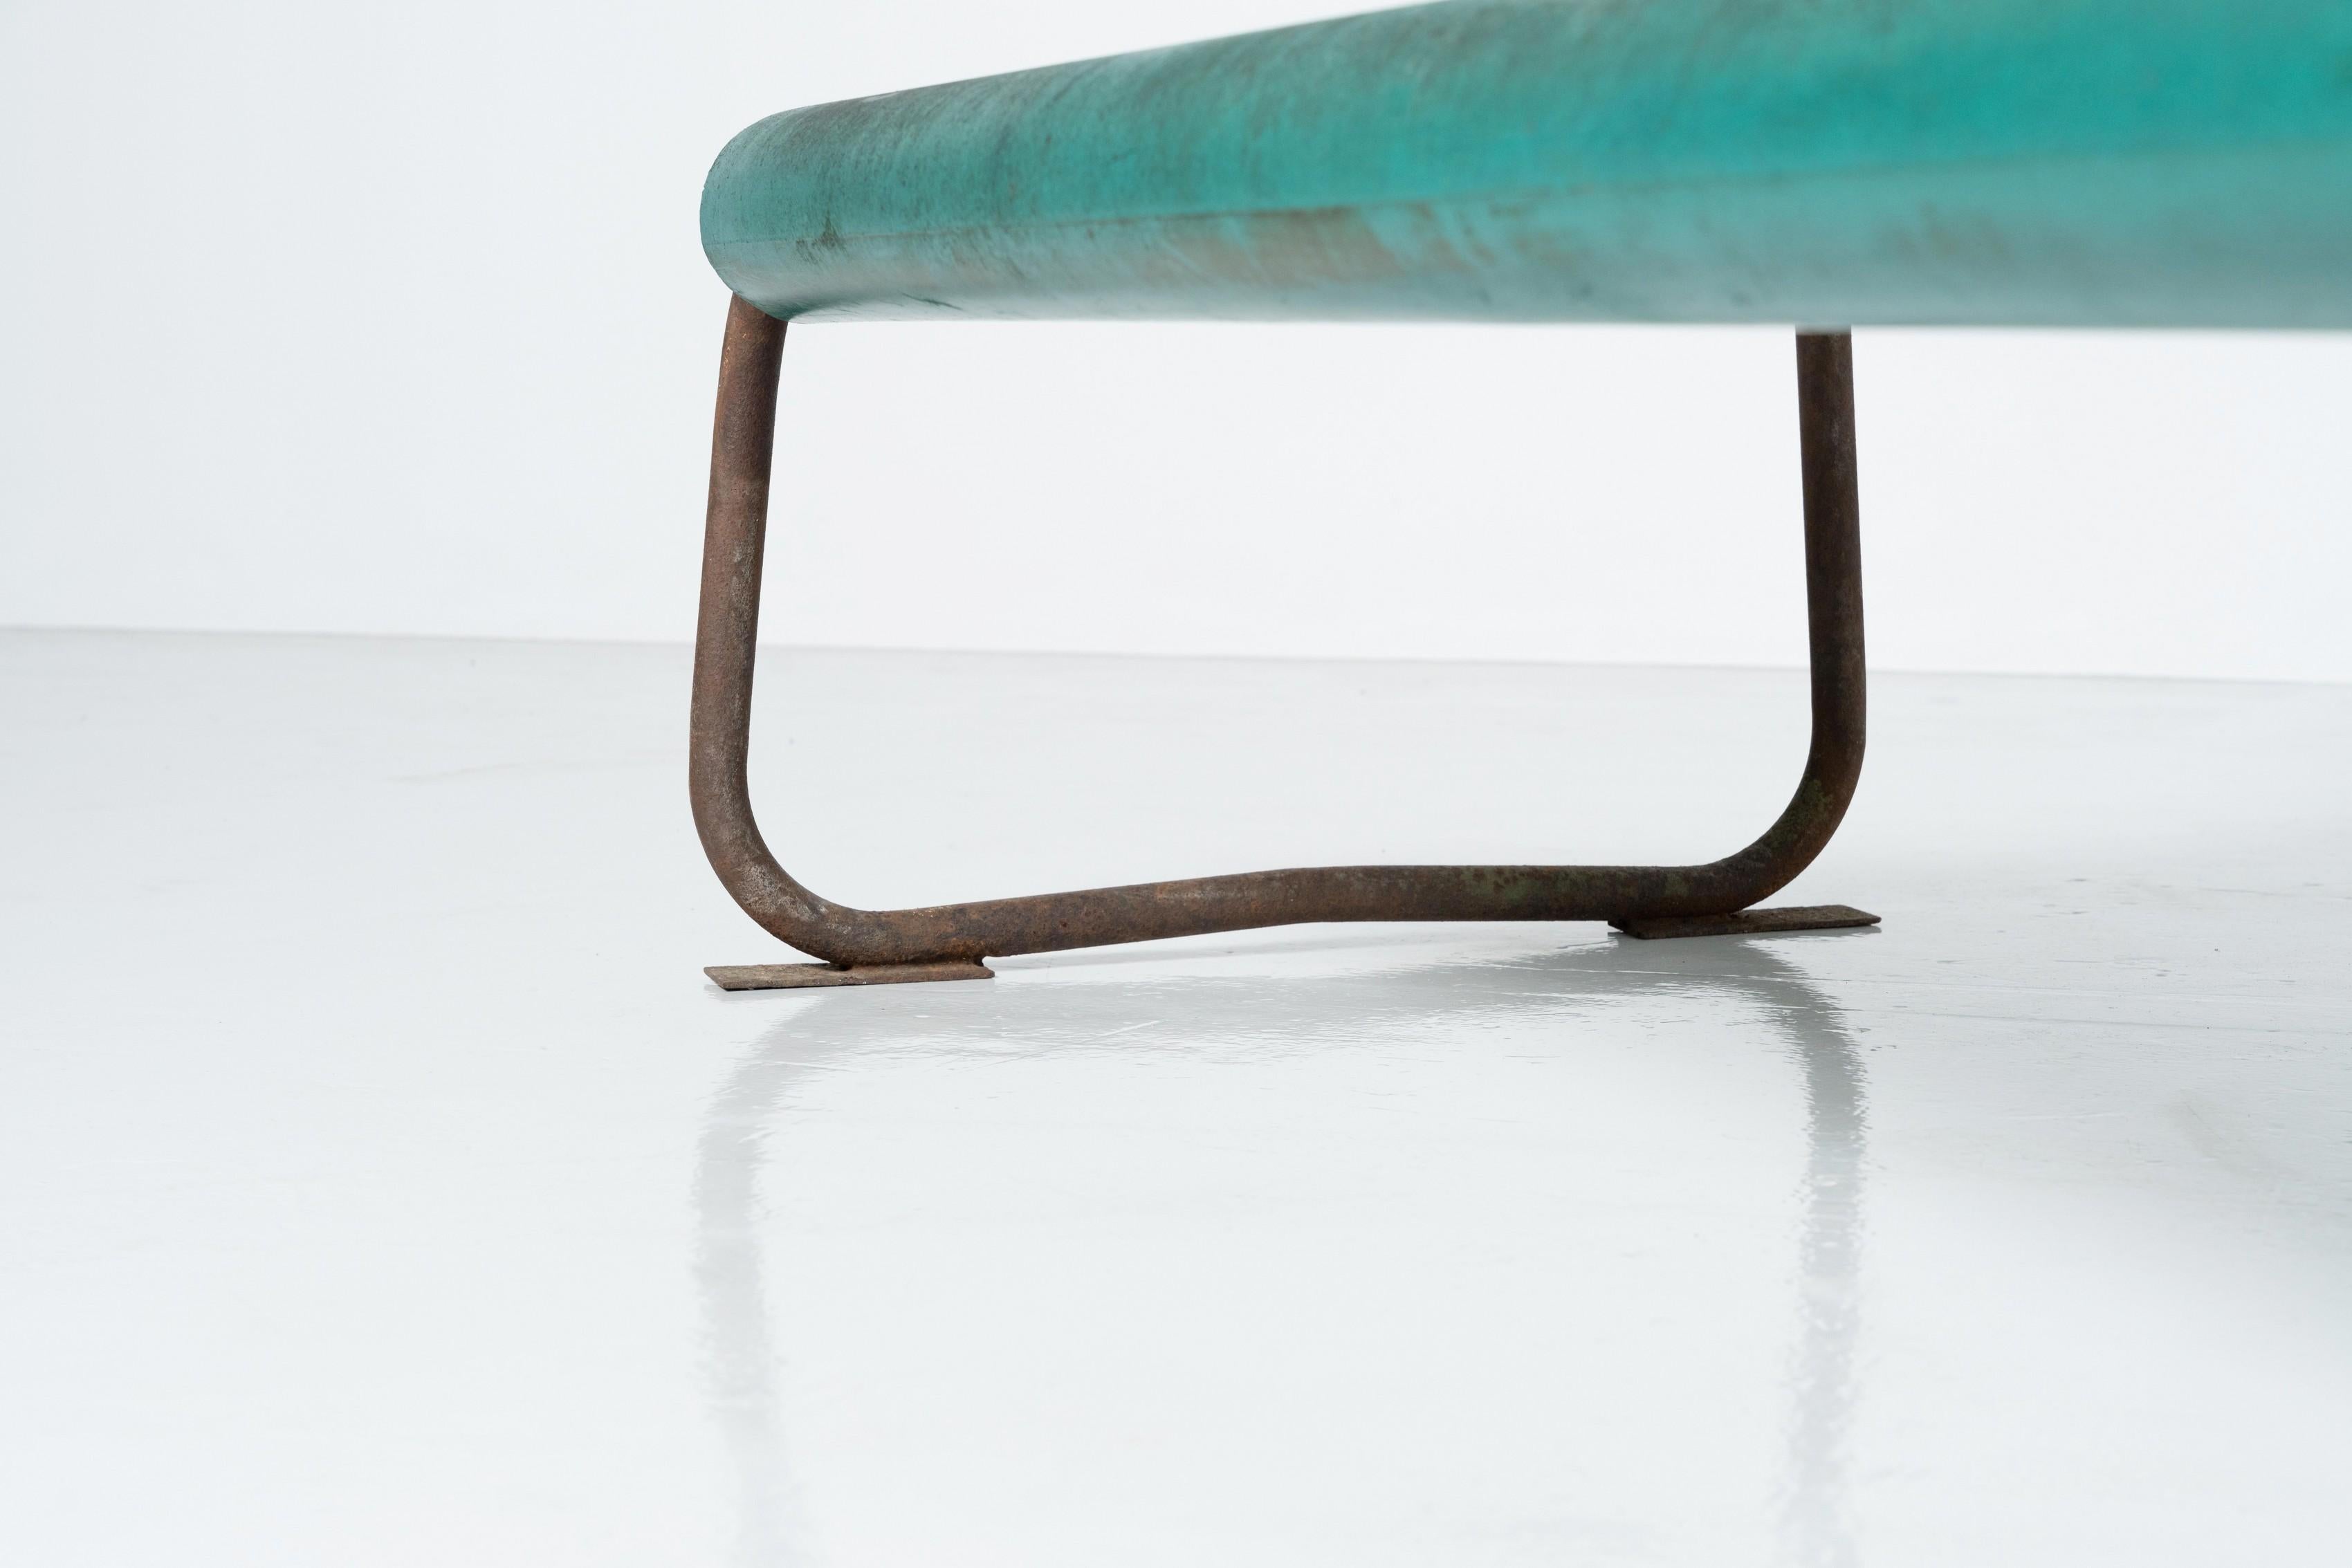 This is a remarkable midcentury floating bench designed by Swiss Architect Willy Guhl. Switzerland, circa 1960. Willy Guhl was well known for its minimal designs which is clearly visible in the design of this bench. The green seat is made